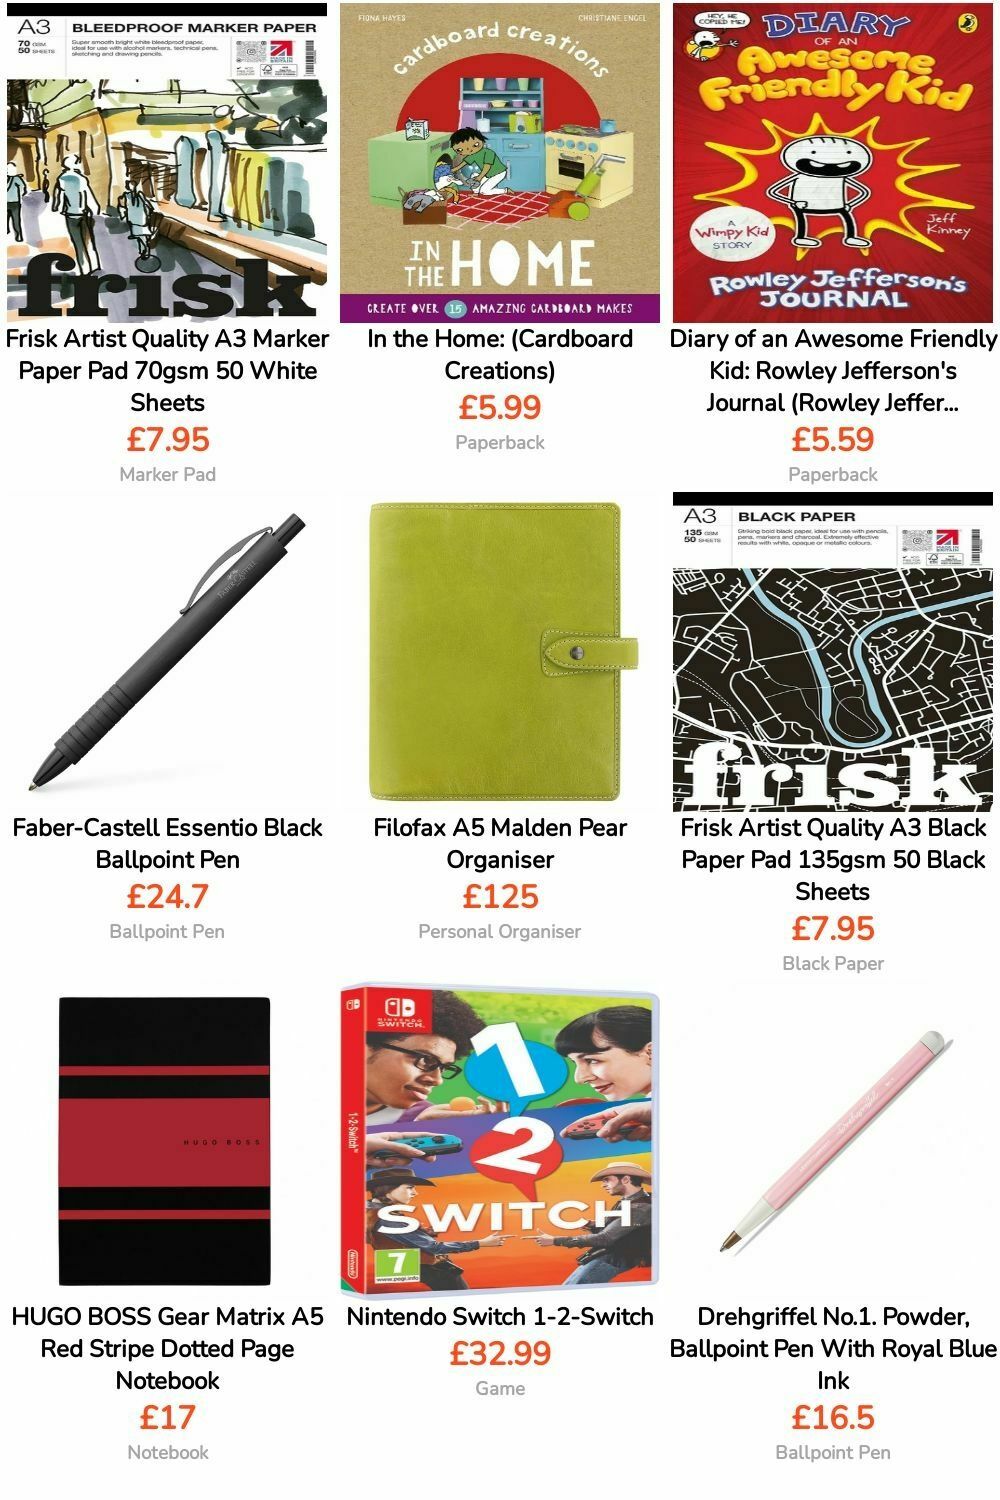 WHSmith Offers from 18 September